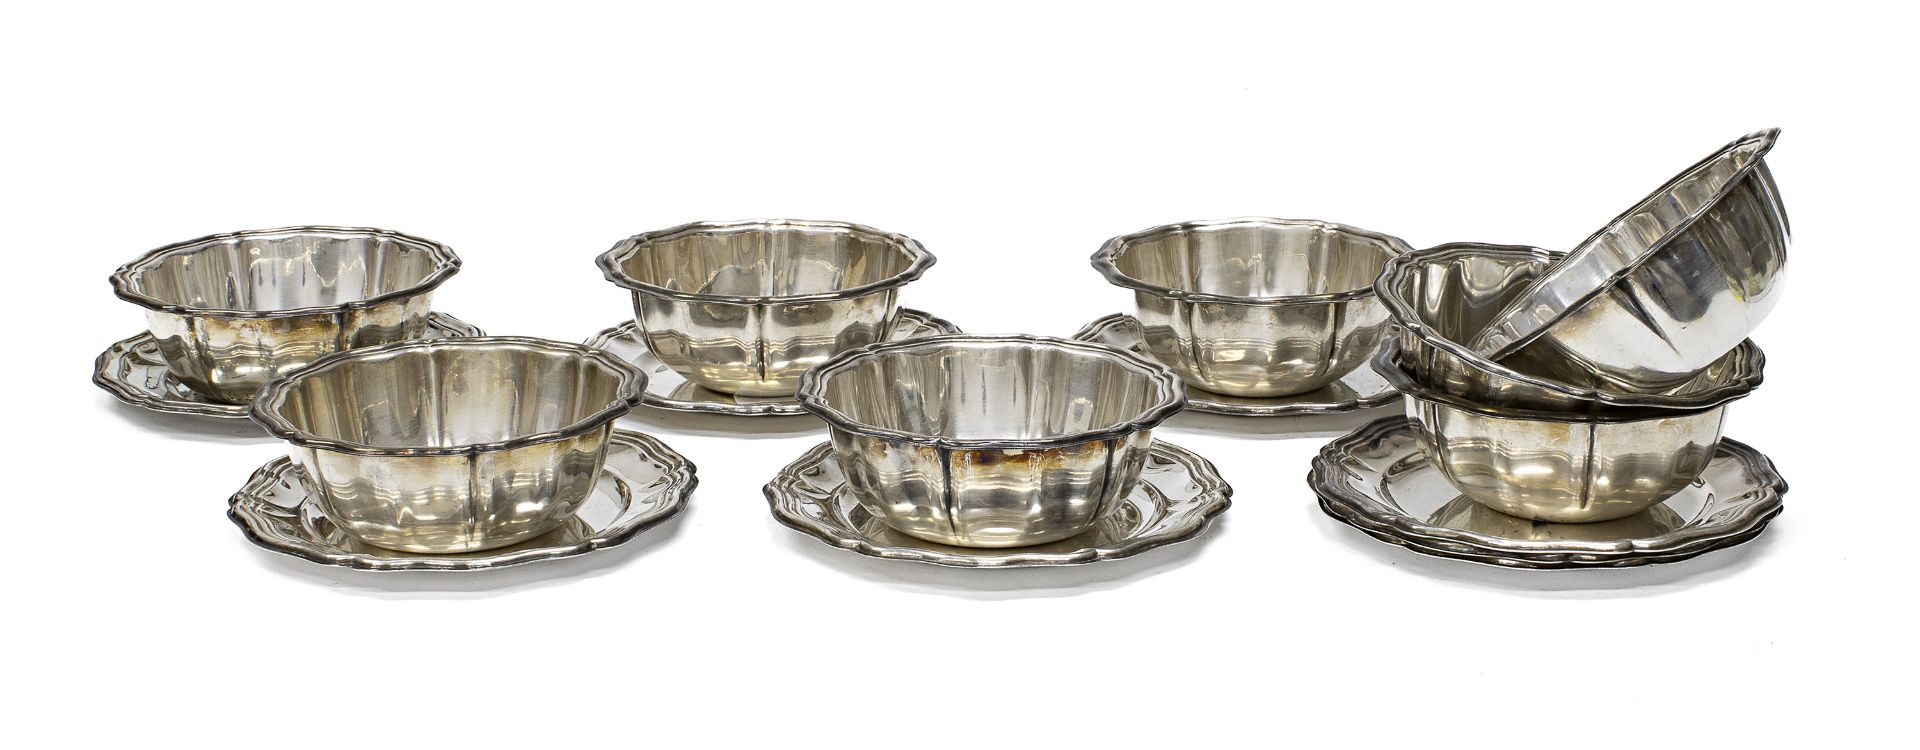 EIGHT SILVER-PLATED FRUIT CUPS 20TH CENTURY